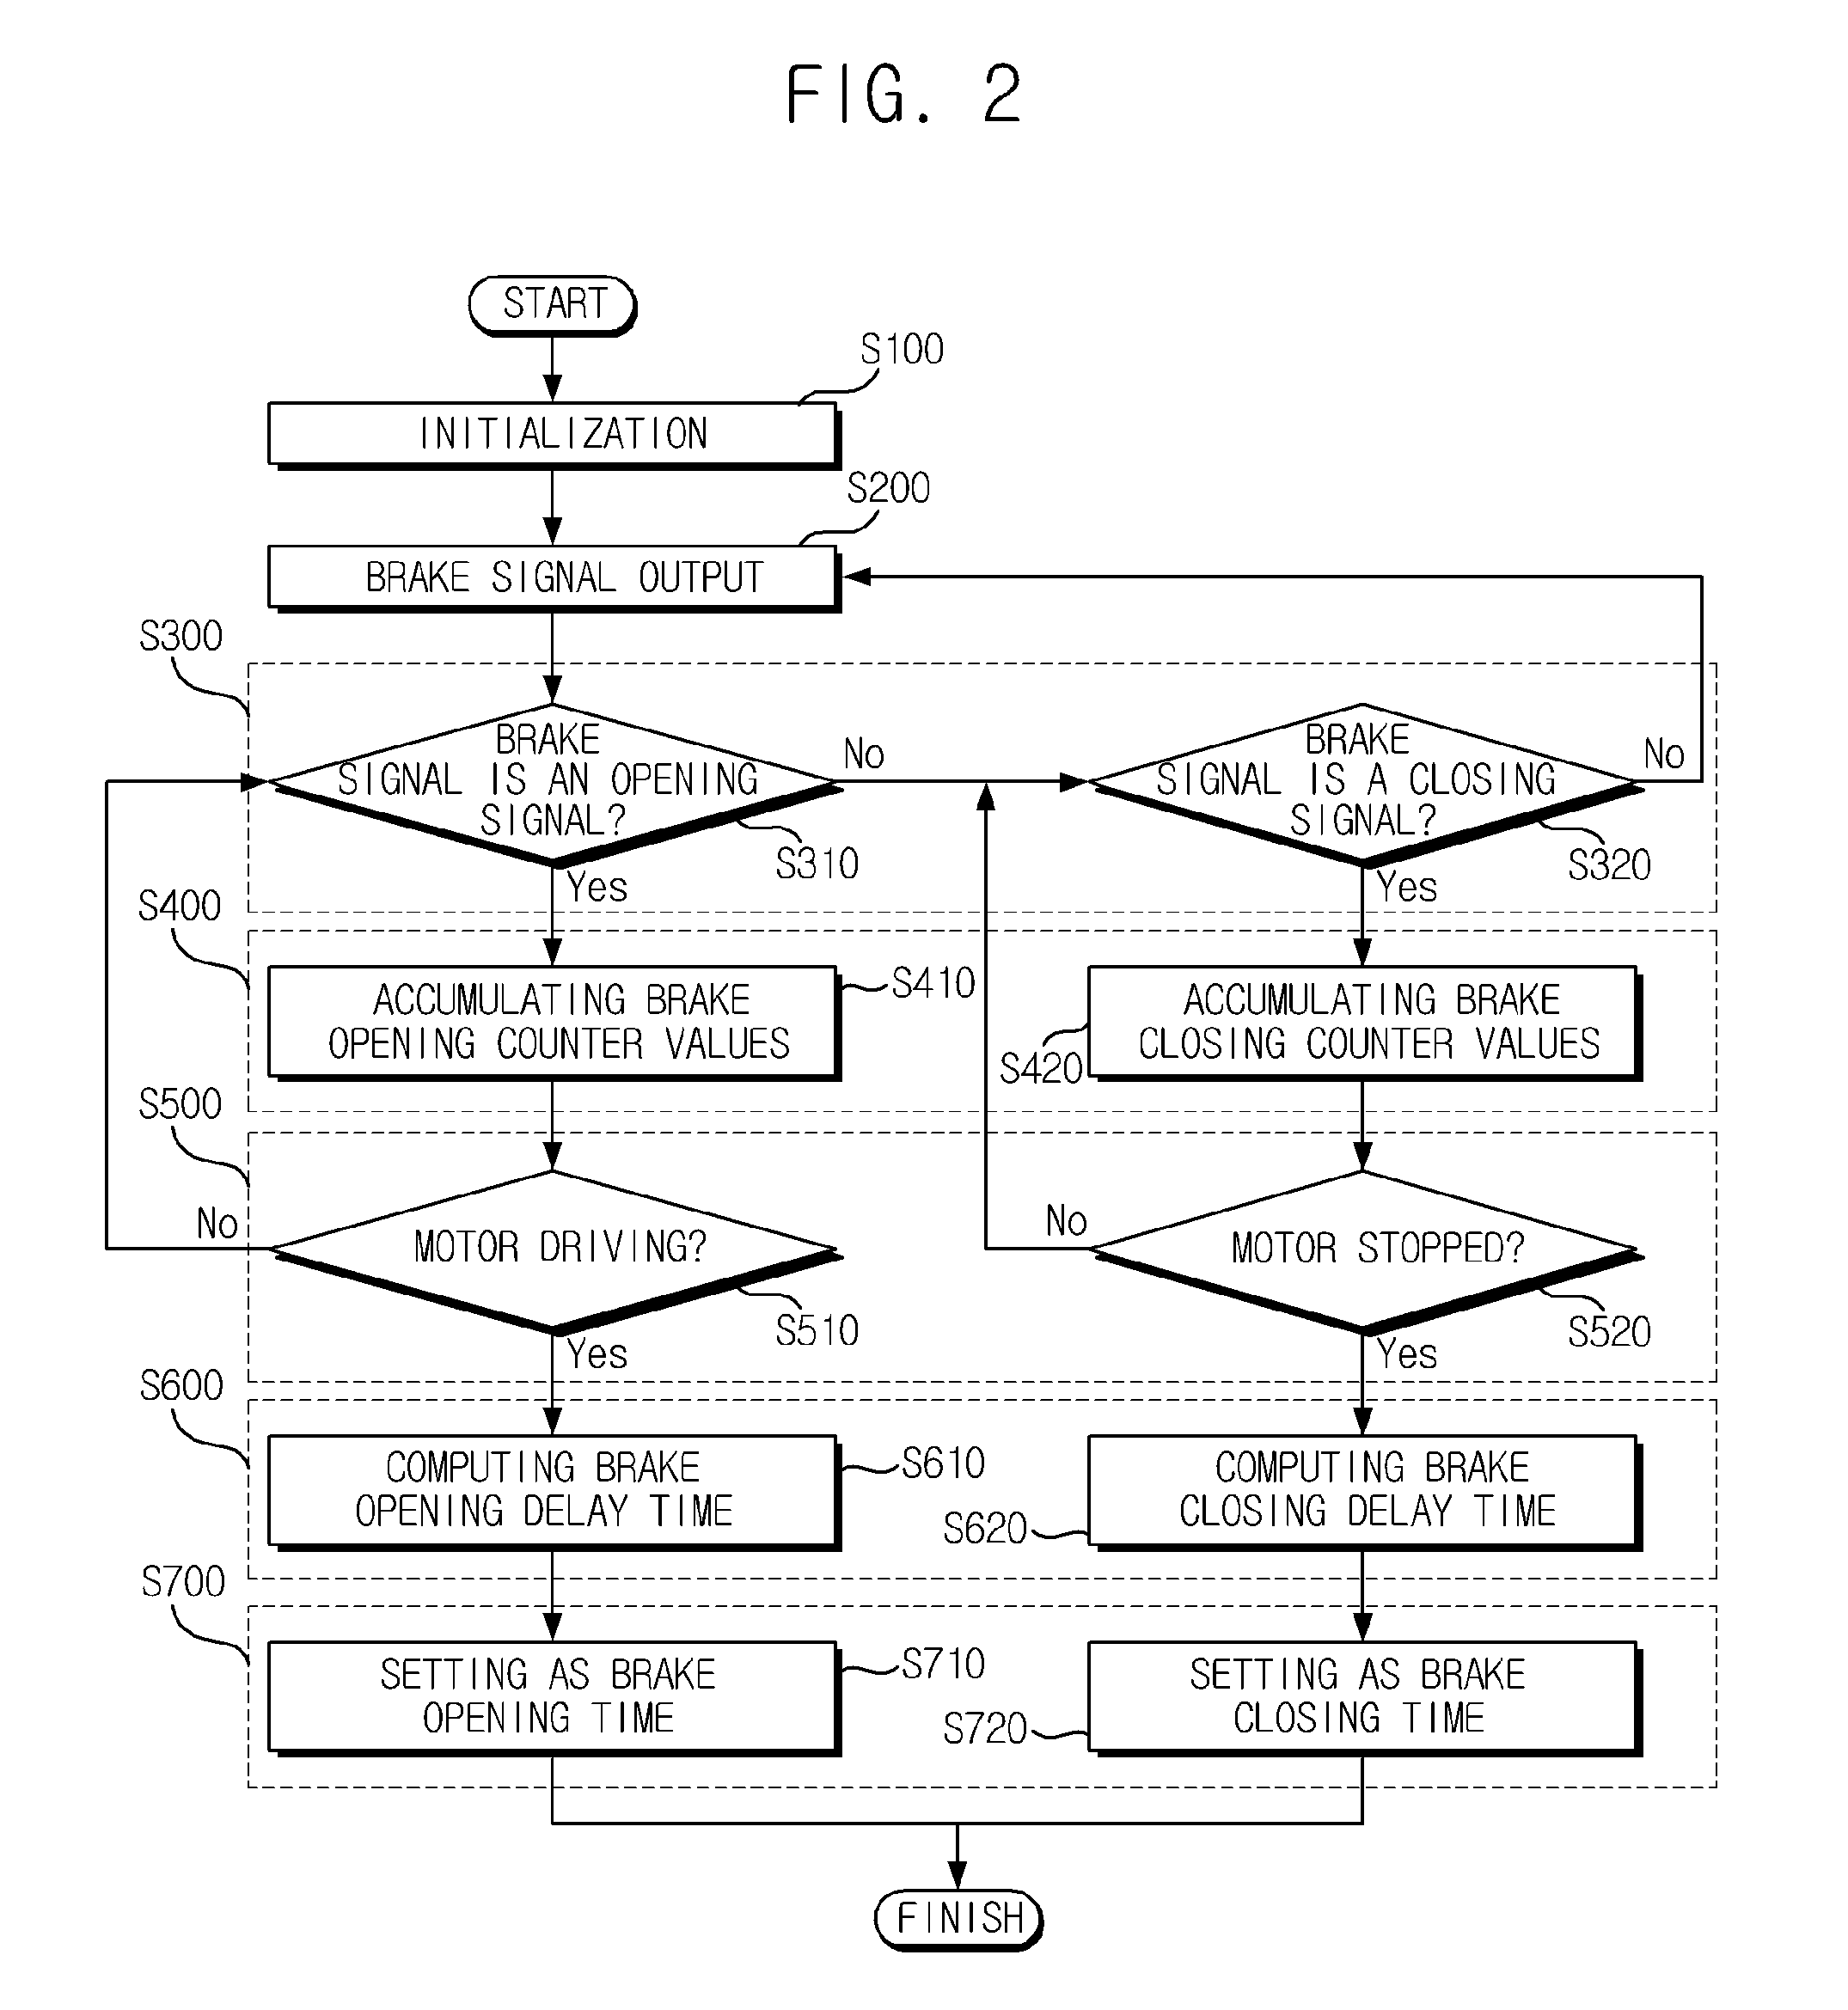 Method for measuring opening and closing delay time of elevator brake